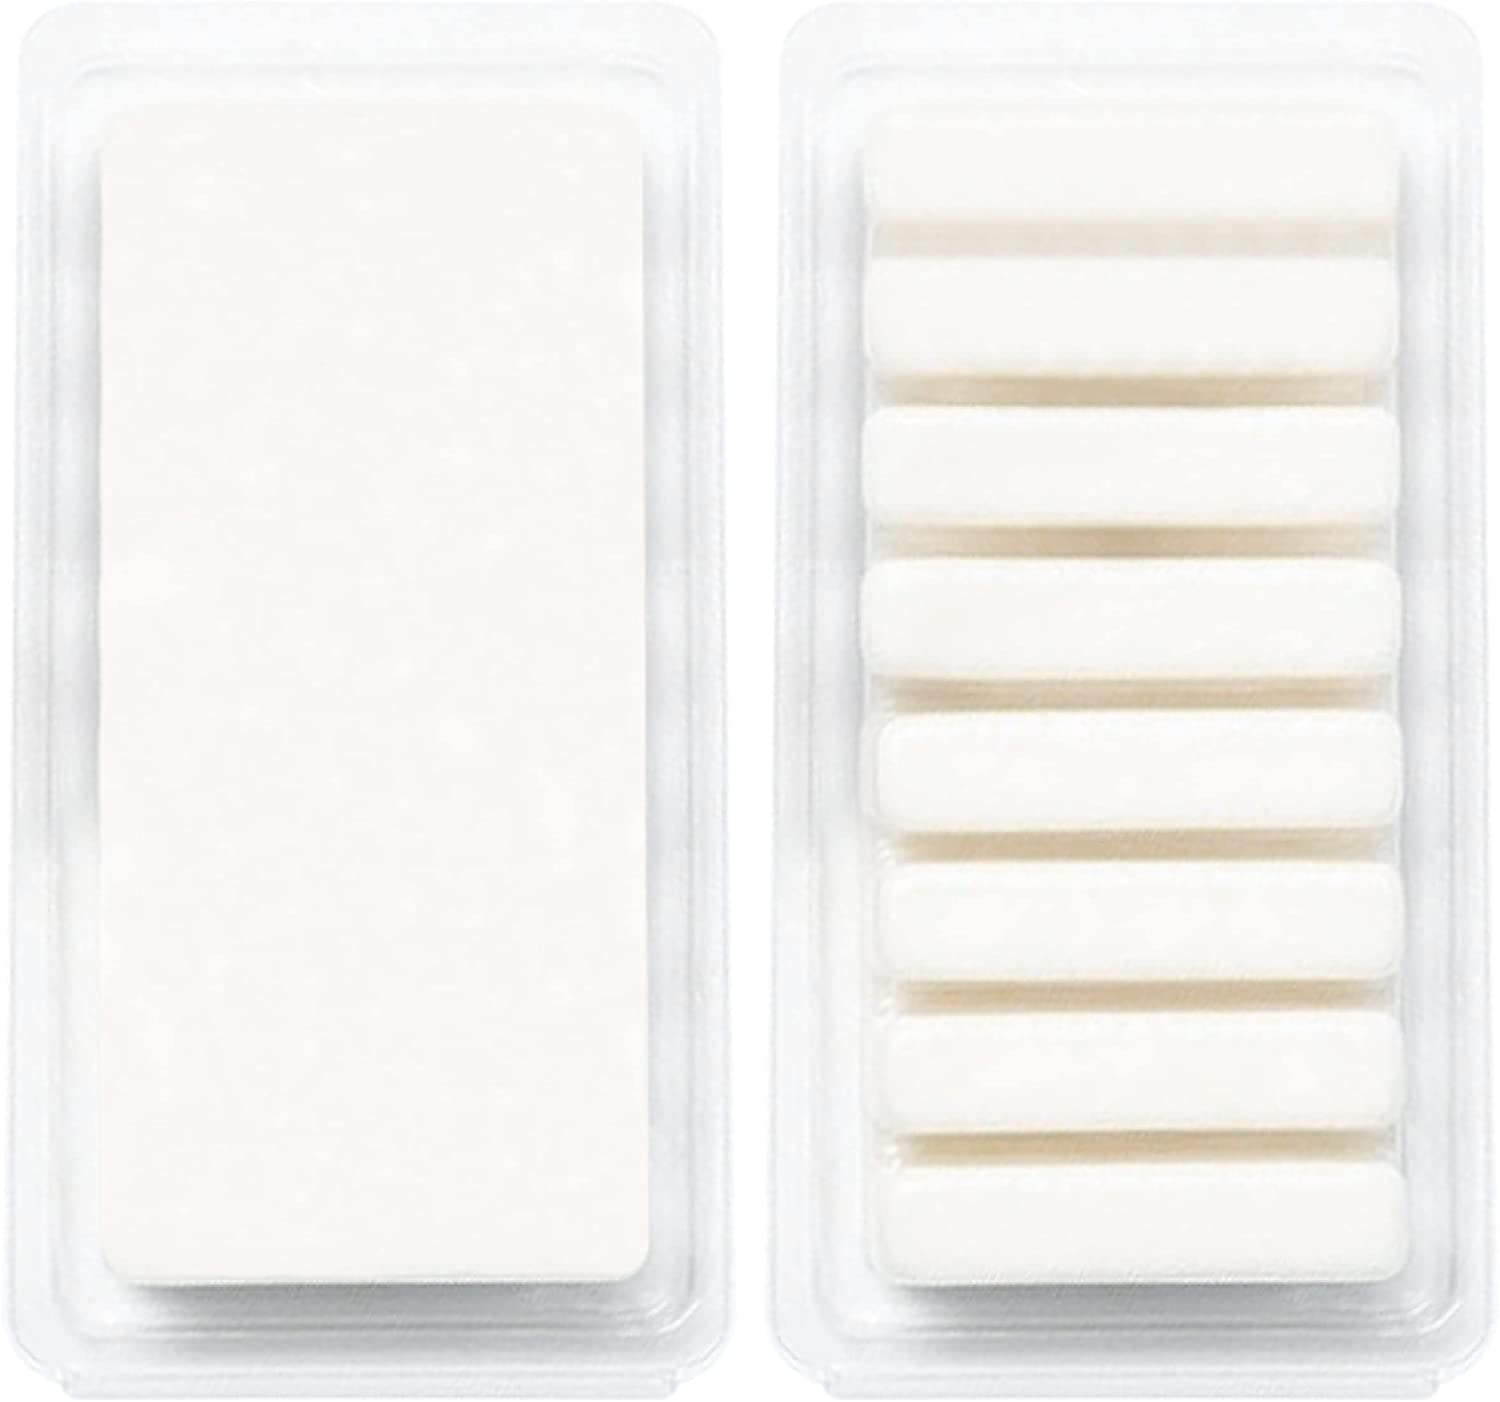 Pack of Wax Liners - Pack of 5x Wax Melt Liners - Fragrances